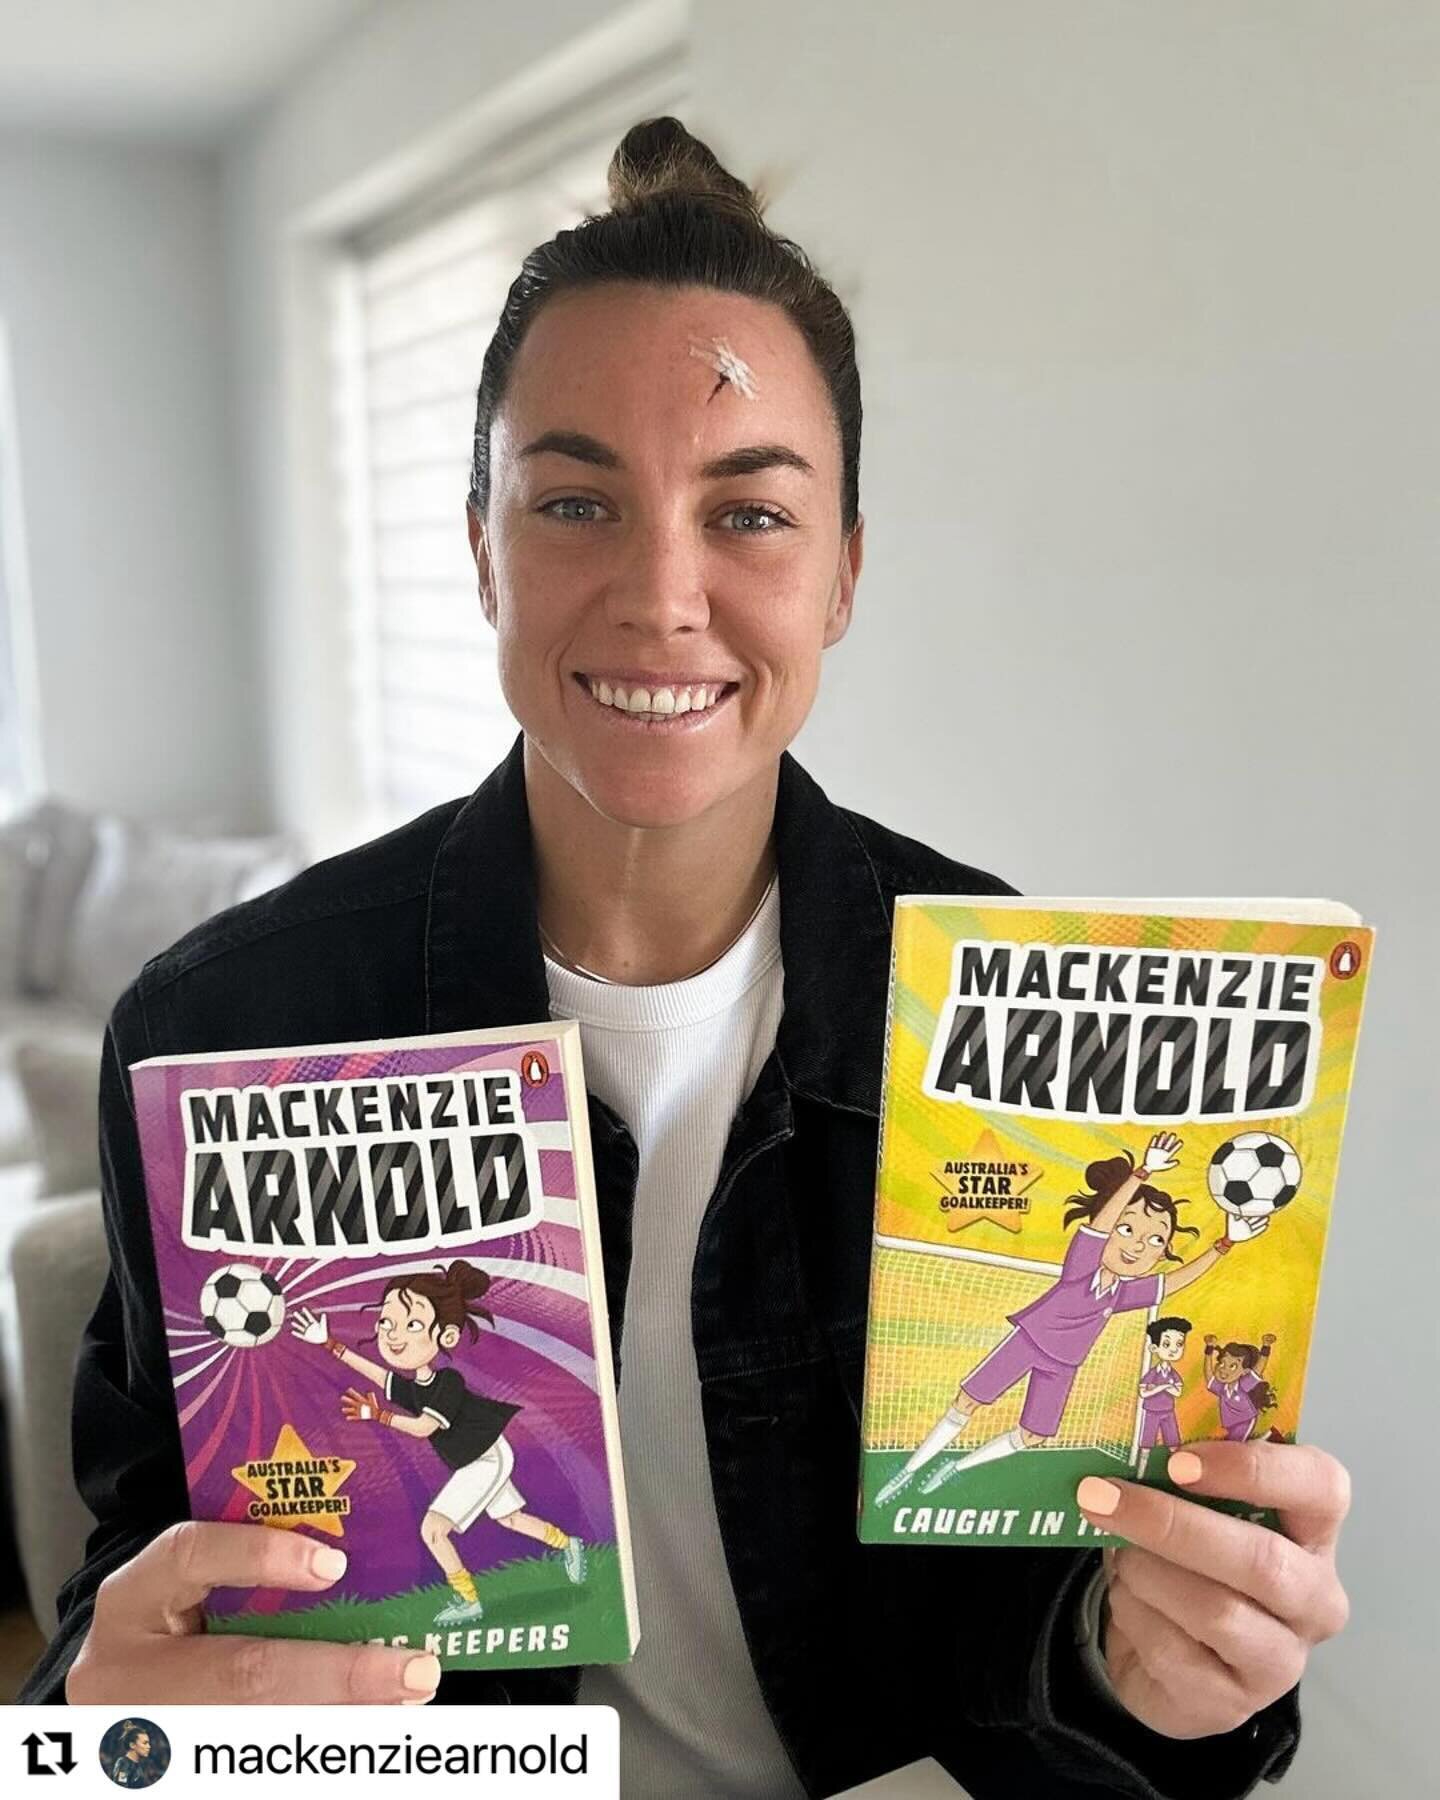 Huge thanks to the incredible team at @penguinbooksaus for this exciting announcement with our client, Mackenzie Arnold.  Has been an absolute pleasure working with you all on this 📚

#Repost @mackenziearnold 
・・・
I can&rsquo;t believe I&rsquo;m abl